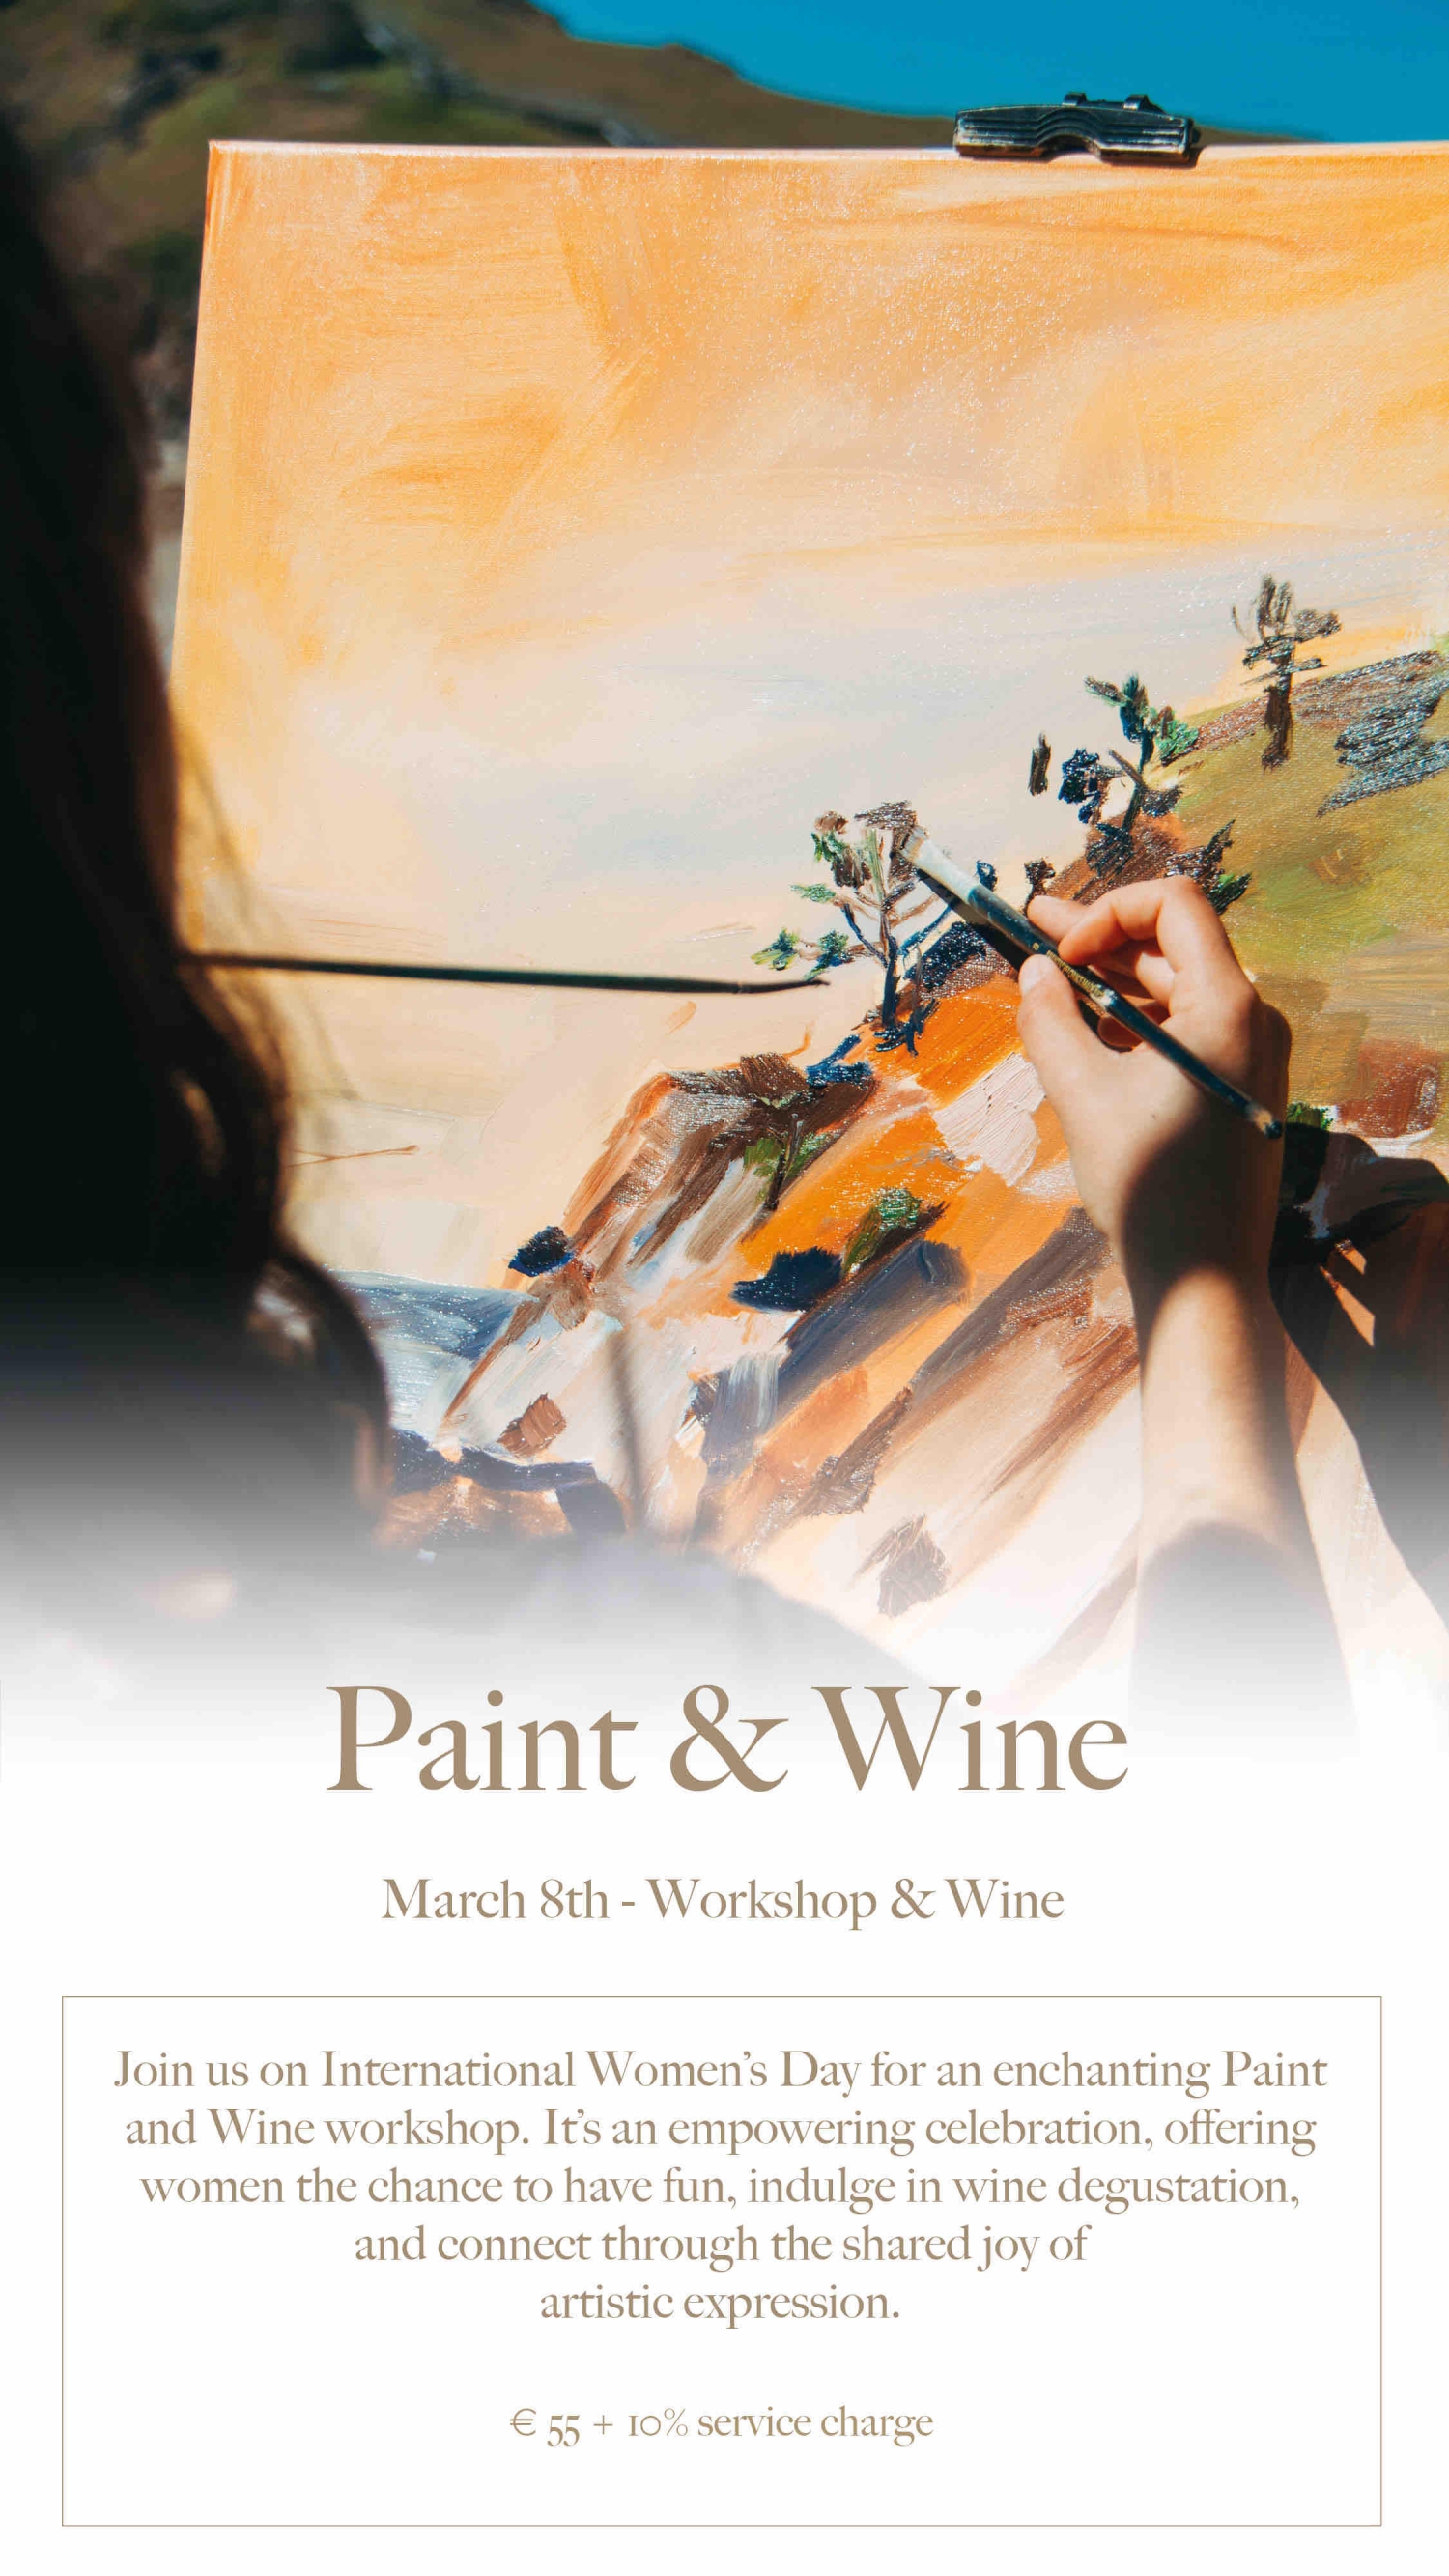 Paint & Wine at The Chedi Lustica Bay